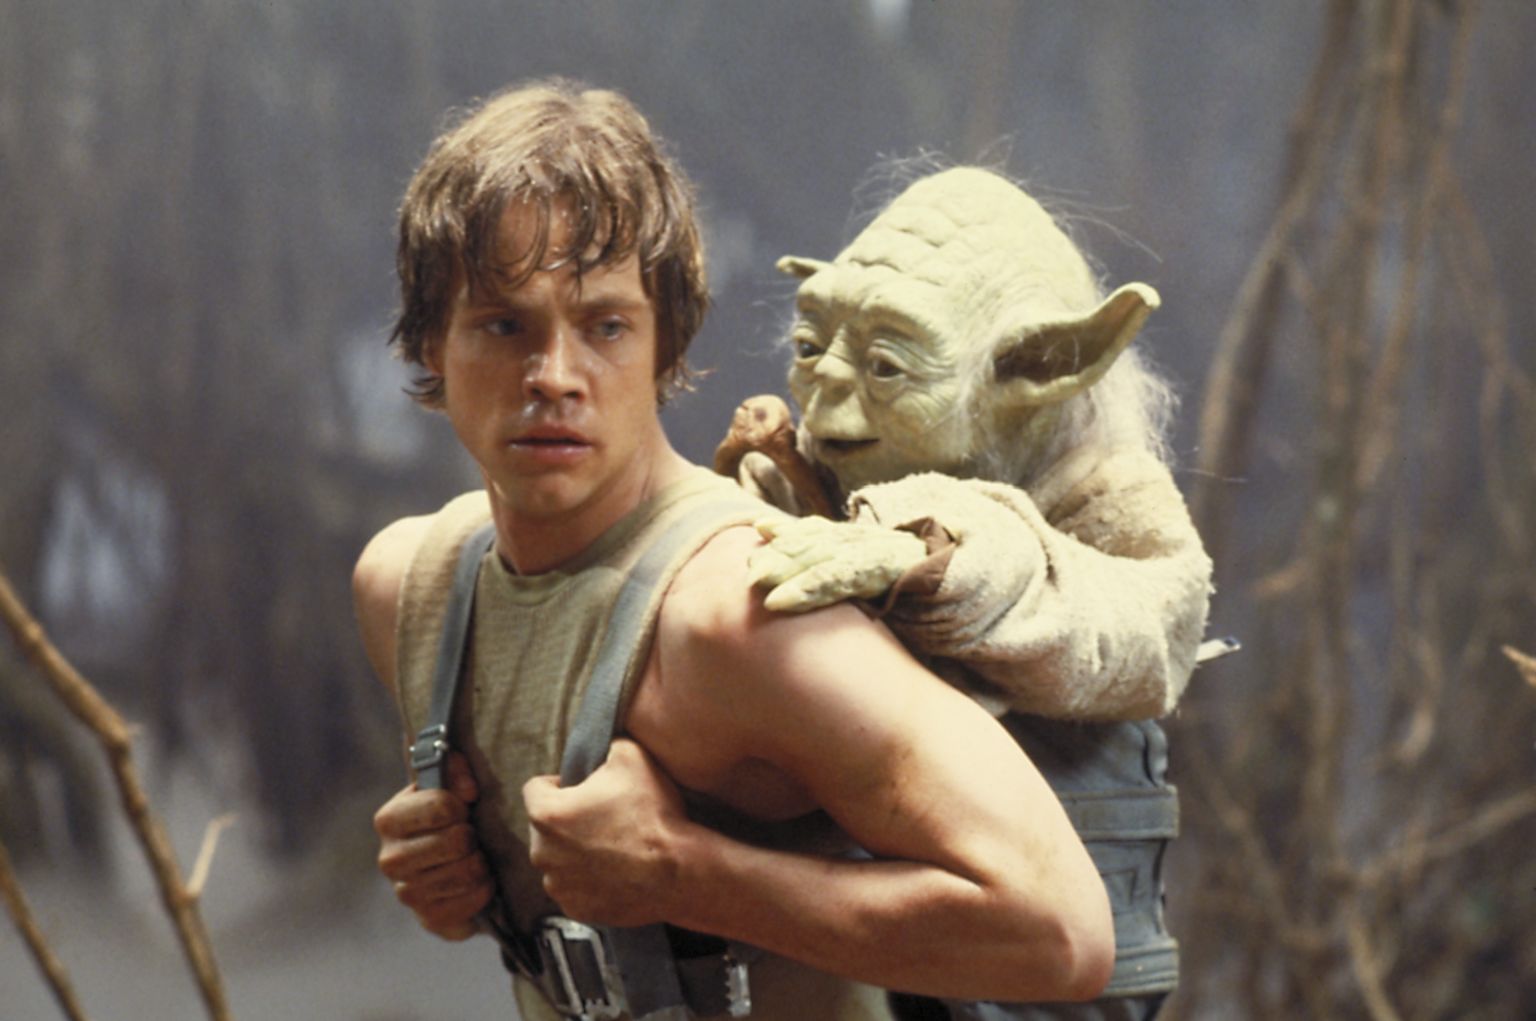 Can You Pass the Ultimate Star Wars Trivia Quiz? Yoda